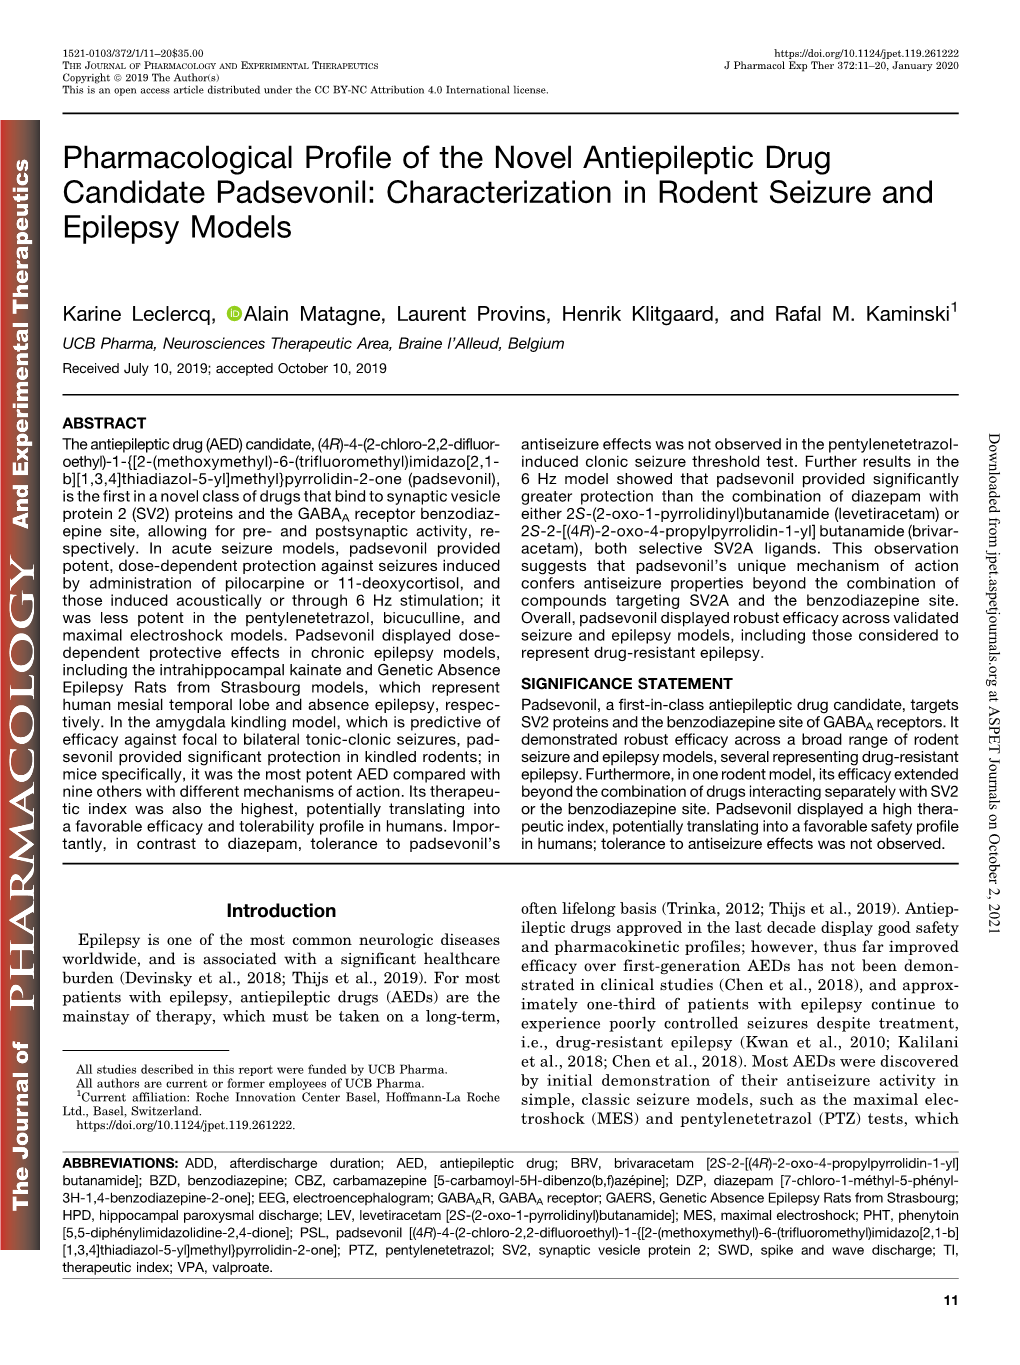 Characterization in Rodent Seizure and Epilepsy Models